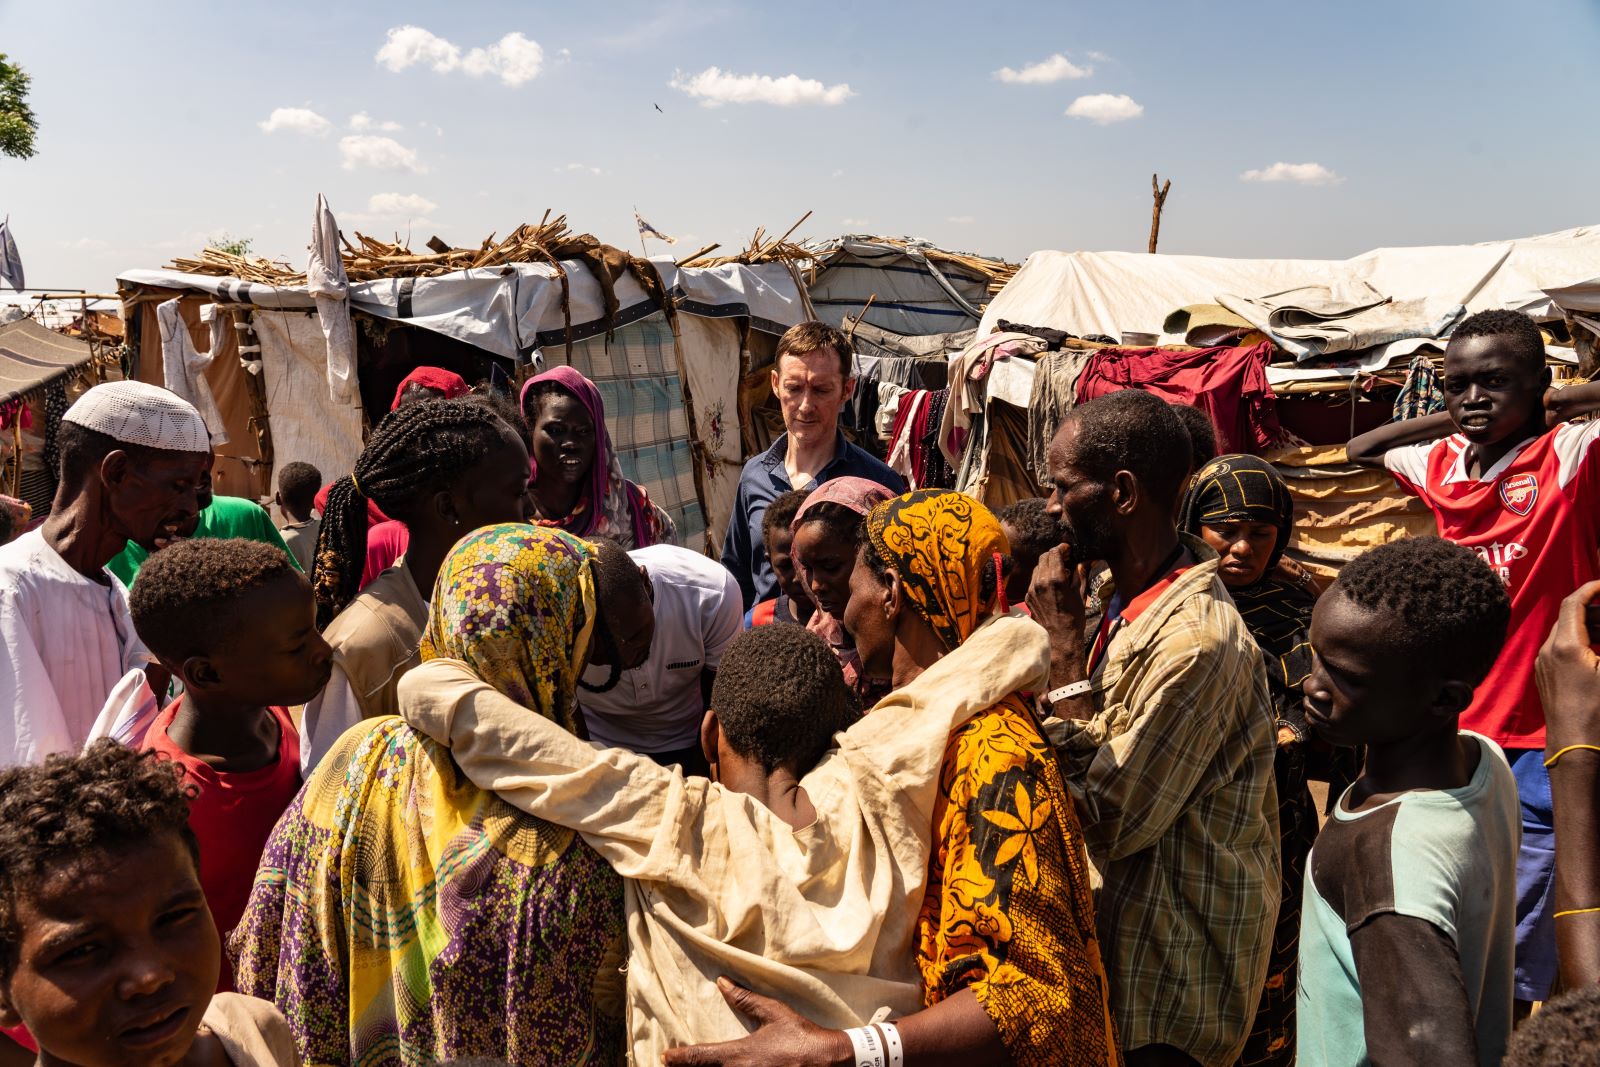 Shane Burke stands in refugee camp, an injured man is being carried into a medical tent.